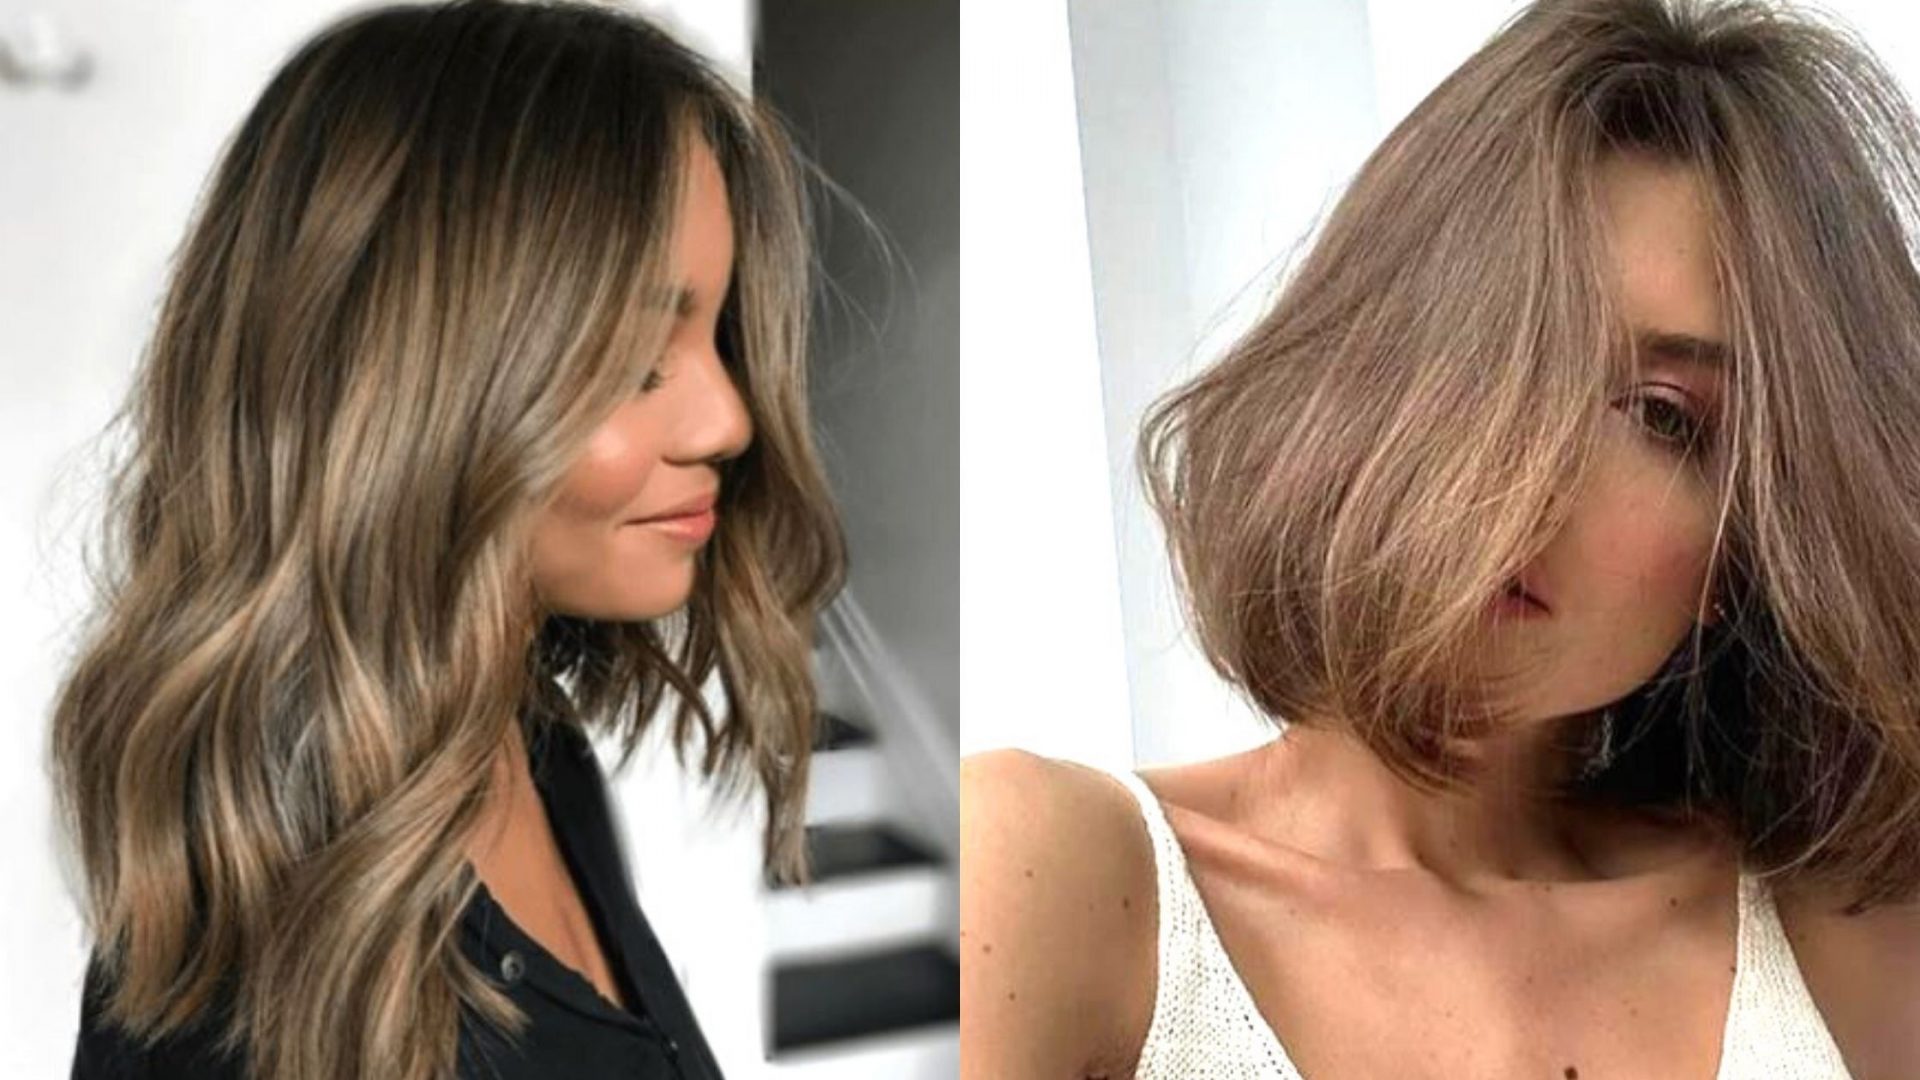 5 Simple Hairstyle Ideas to Change Your Look